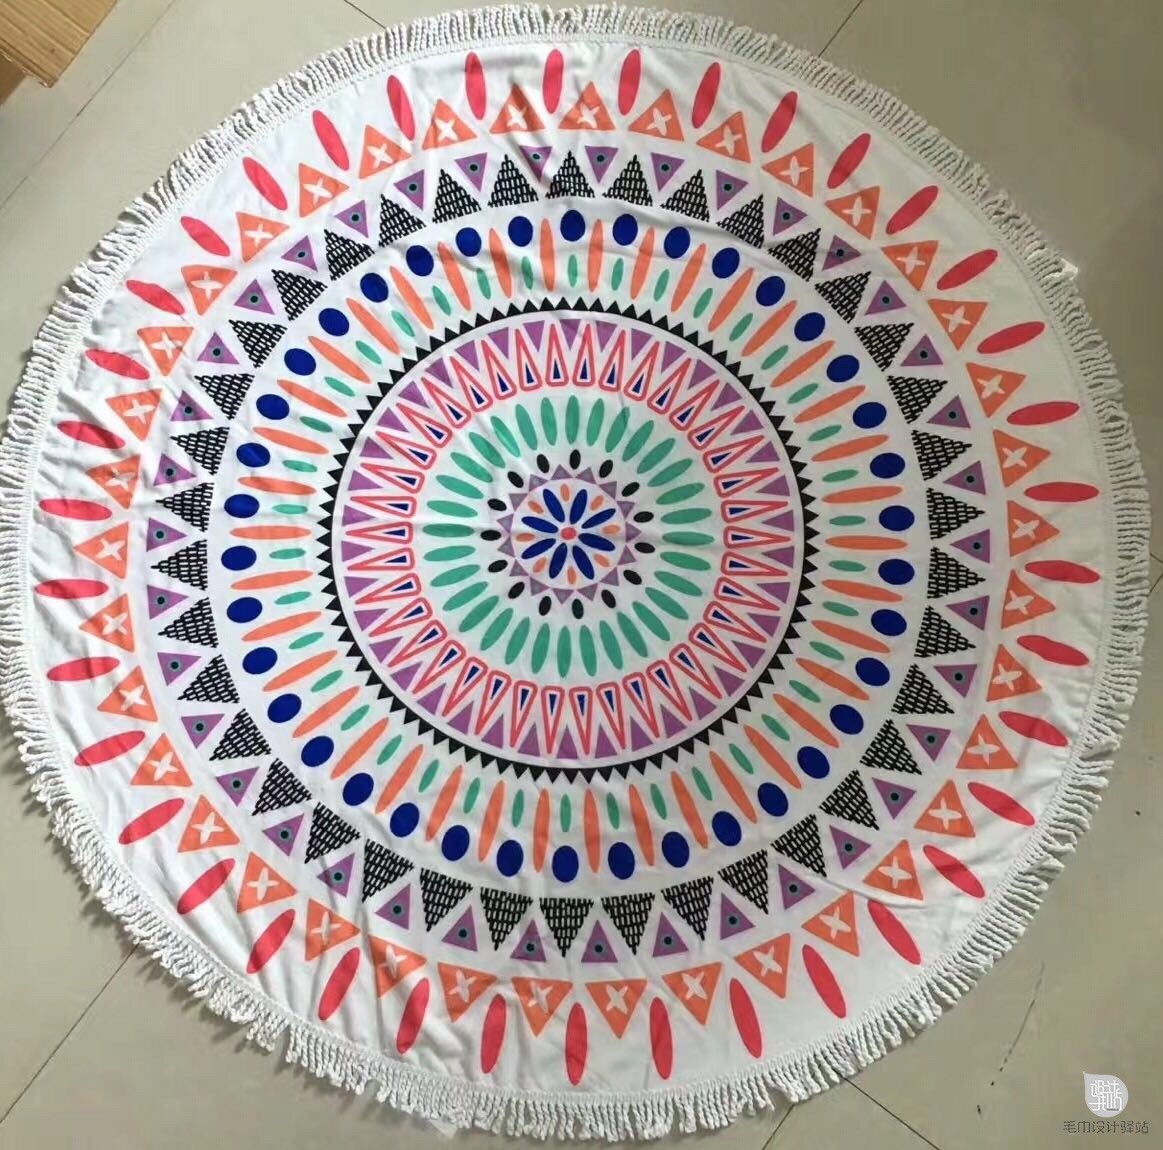  100% cotton velour reactive printed round beach towel with tassels